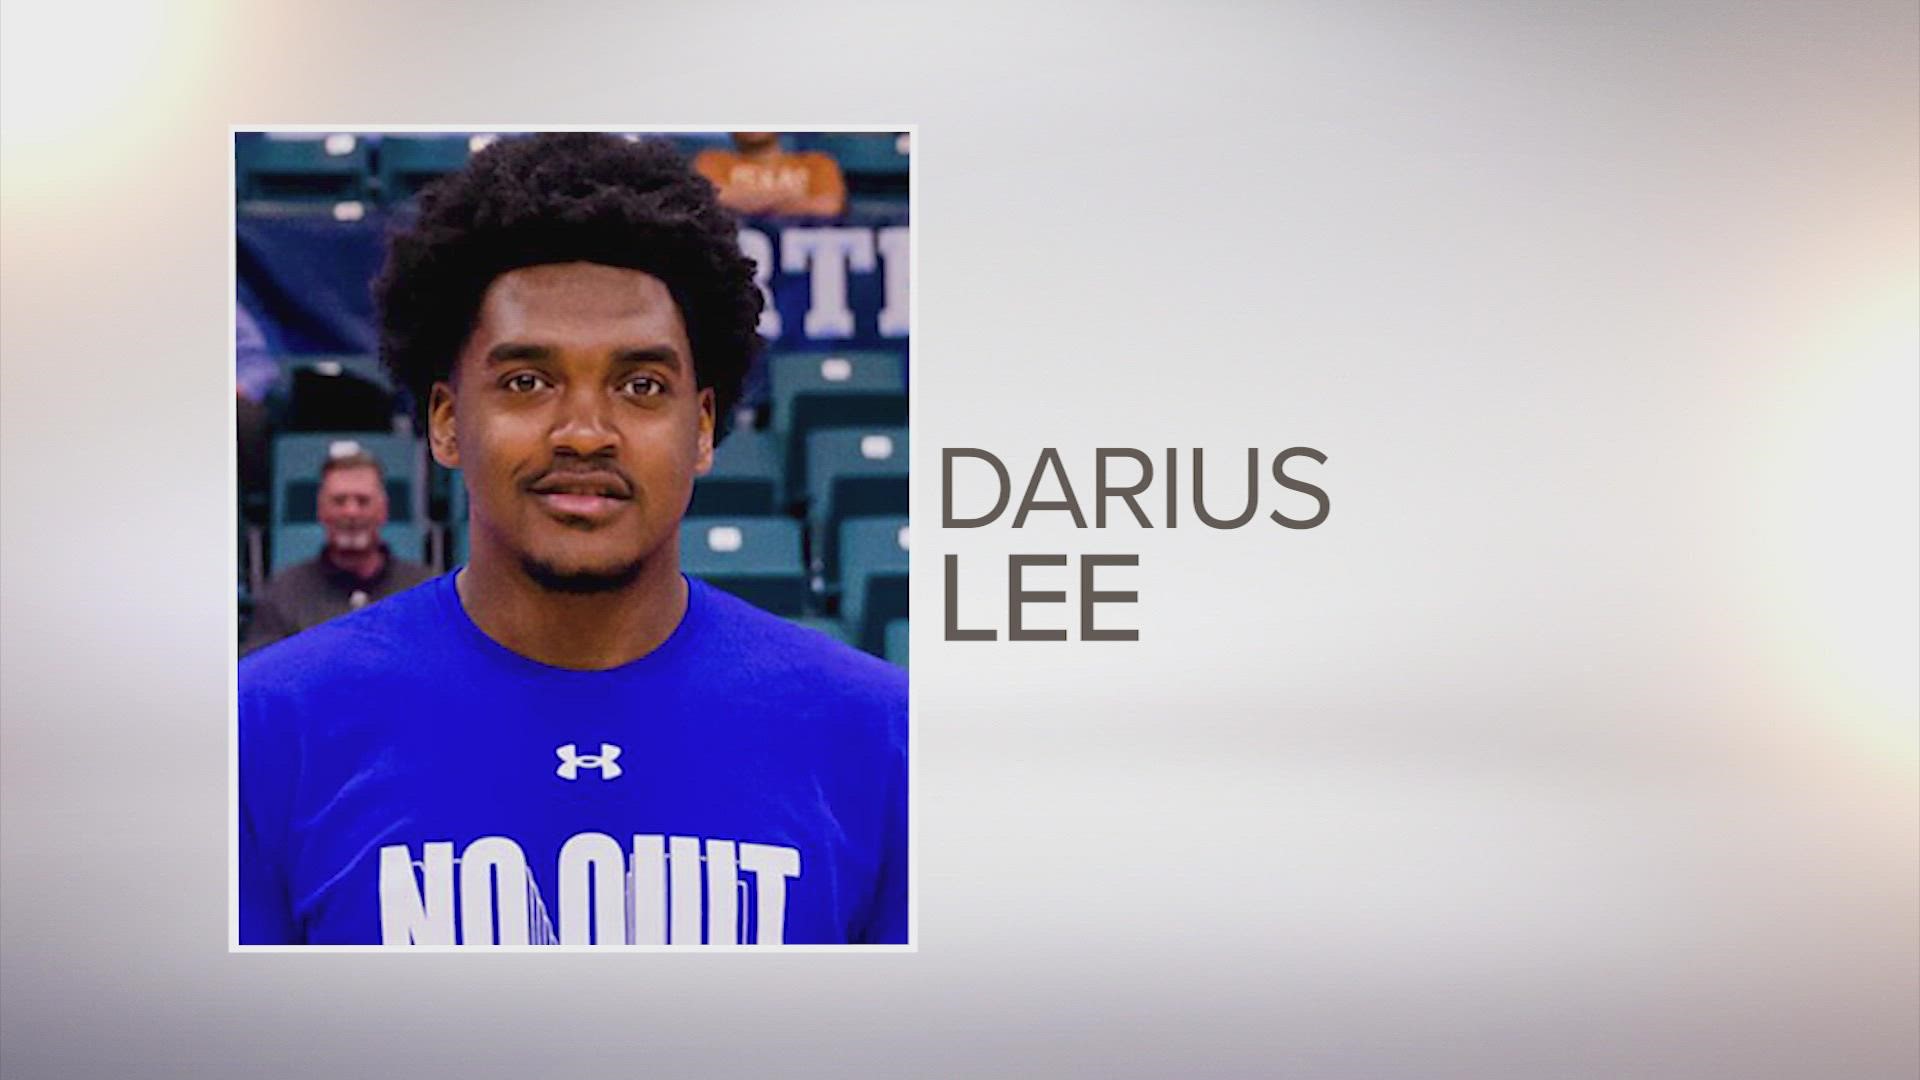 According to the university, the 21-year-old man who died has been identified as Darius Lee, a member of the Houston Baptist University men's basketball team.